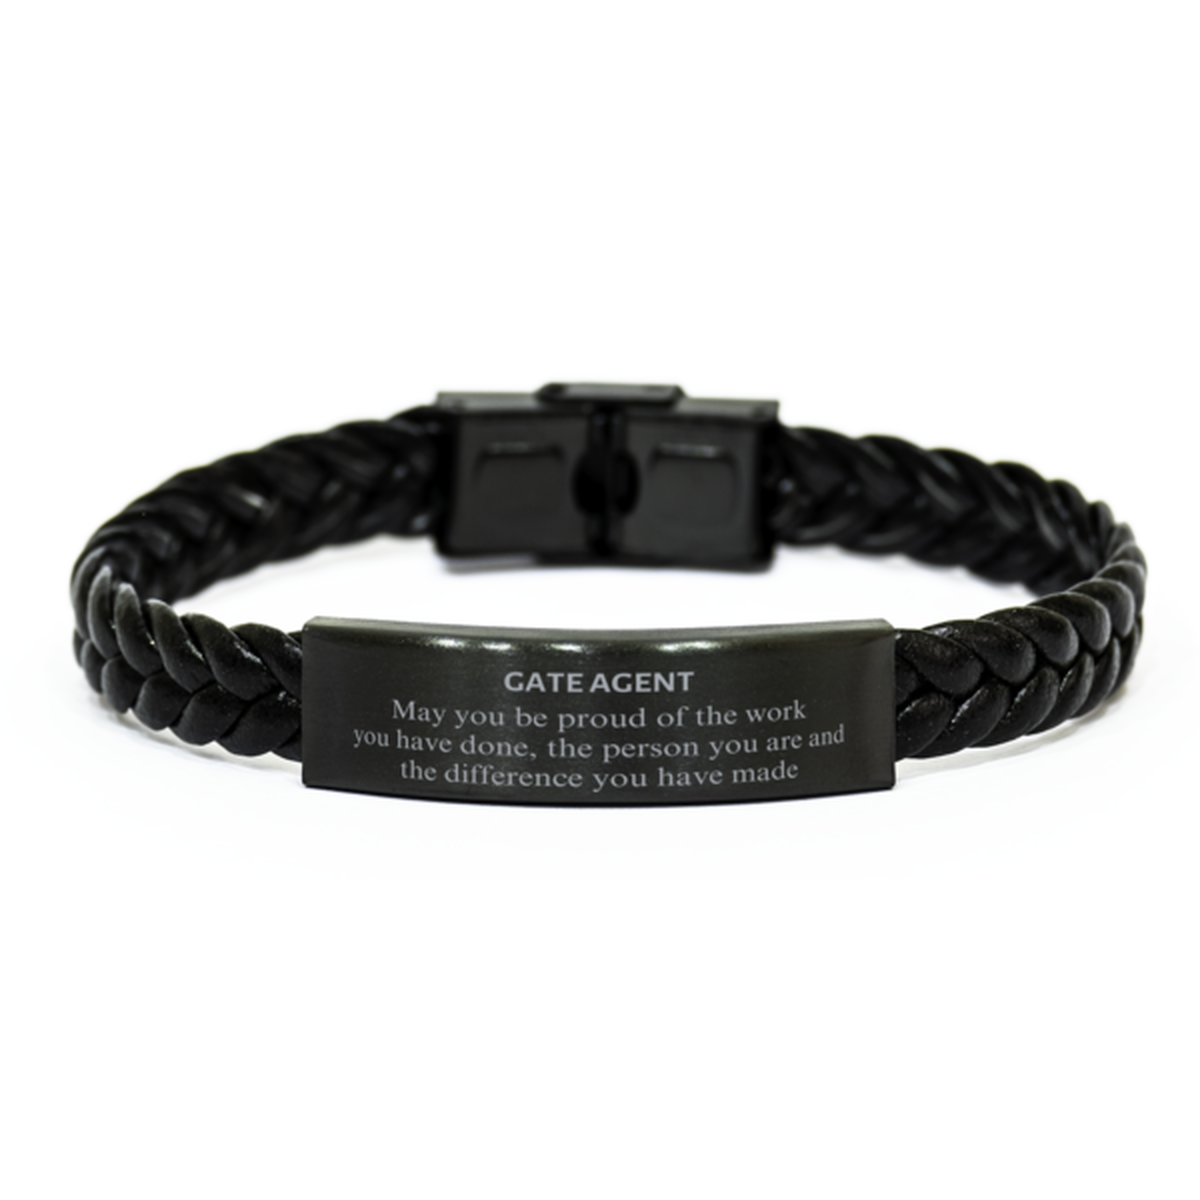 Gate Agent May you be proud of the work you have done, Retirement Gate Agent Braided Leather Bracelet for Colleague Appreciation Gifts Amazing for Gate Agent